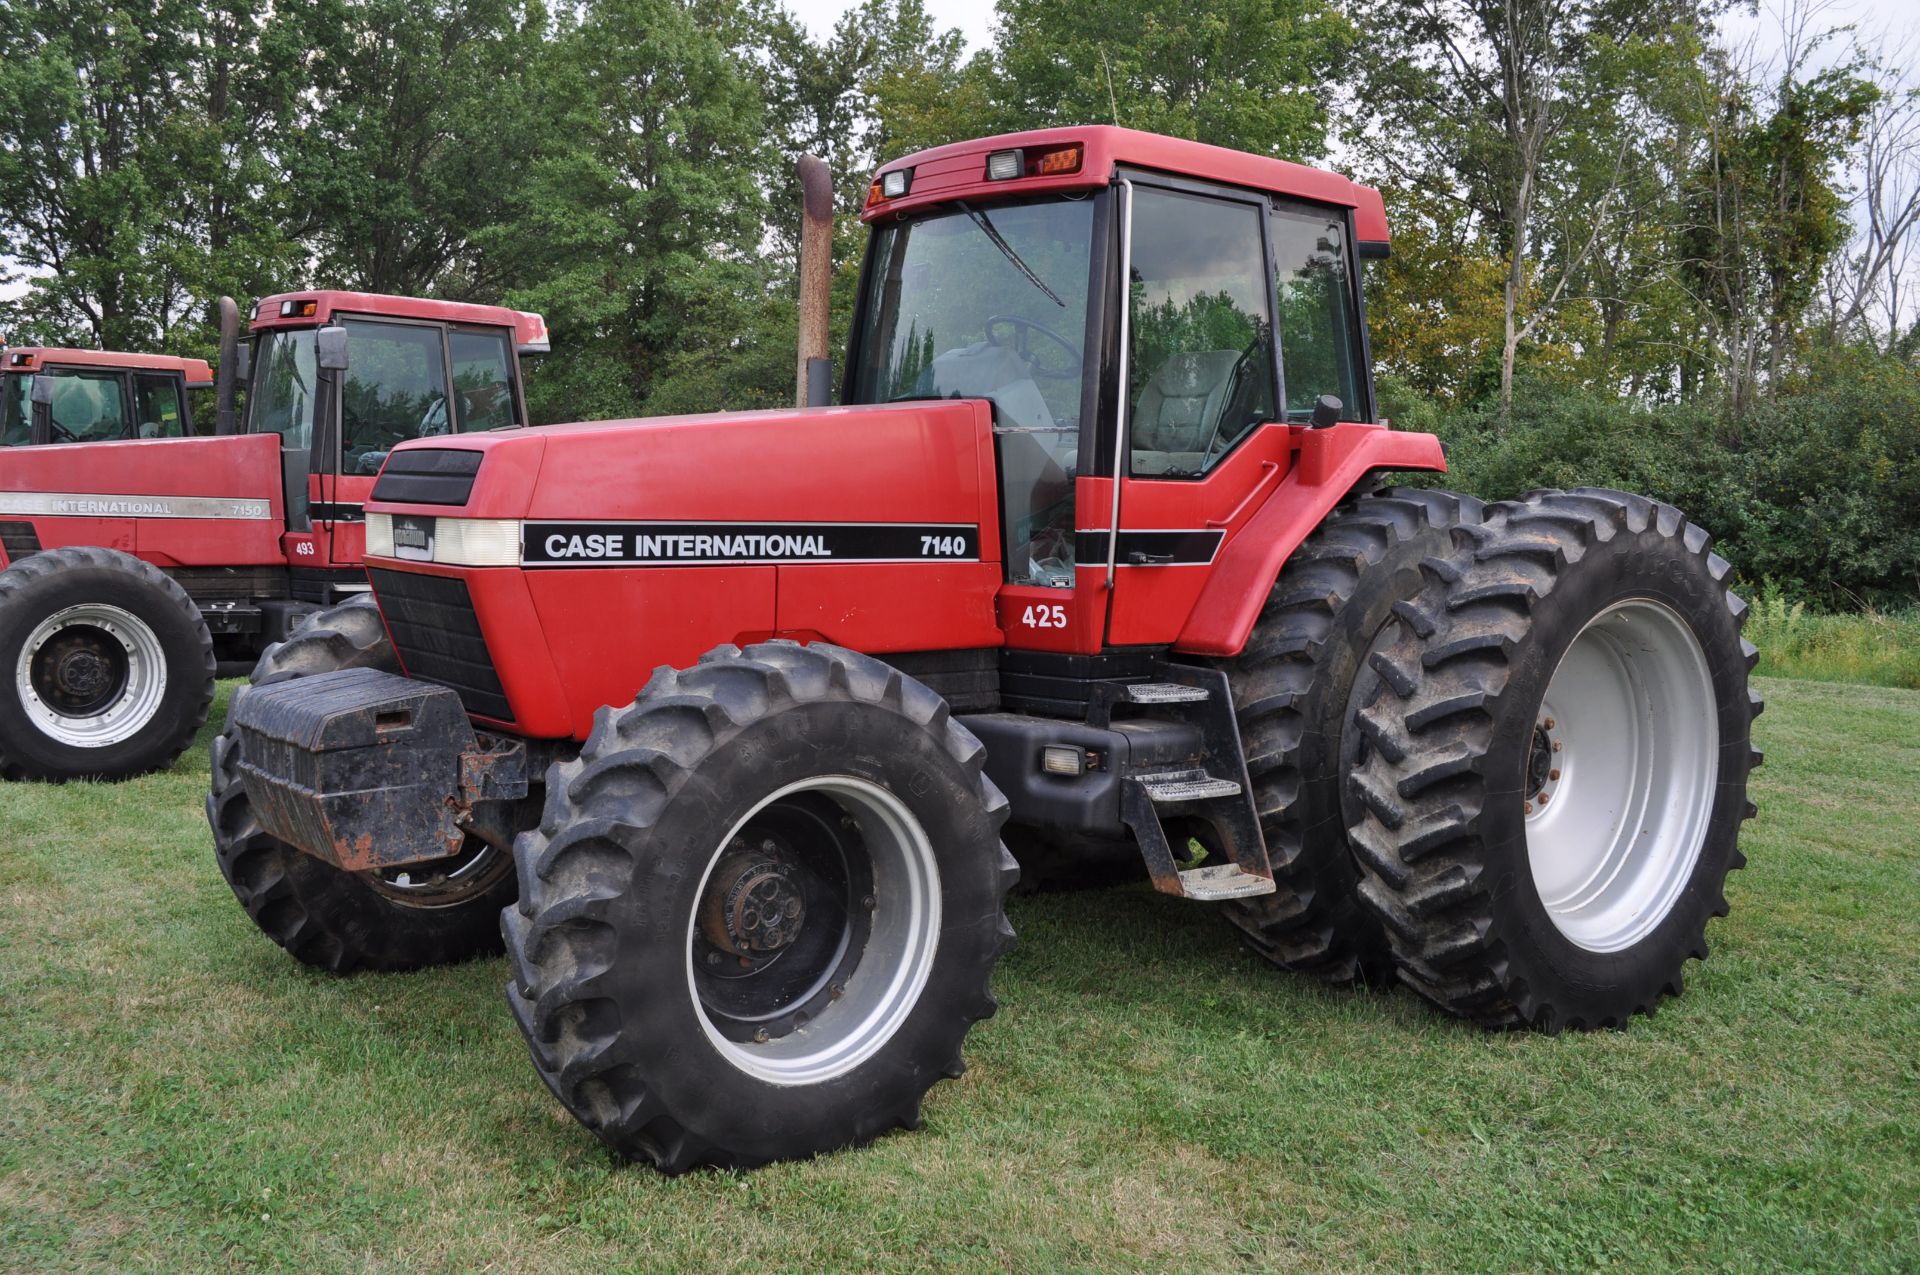 Case IH 7140 tractor, MFWD, C/H/A, 480/80R46 rear duals, 420/90R30 front, 18F 4R powershift